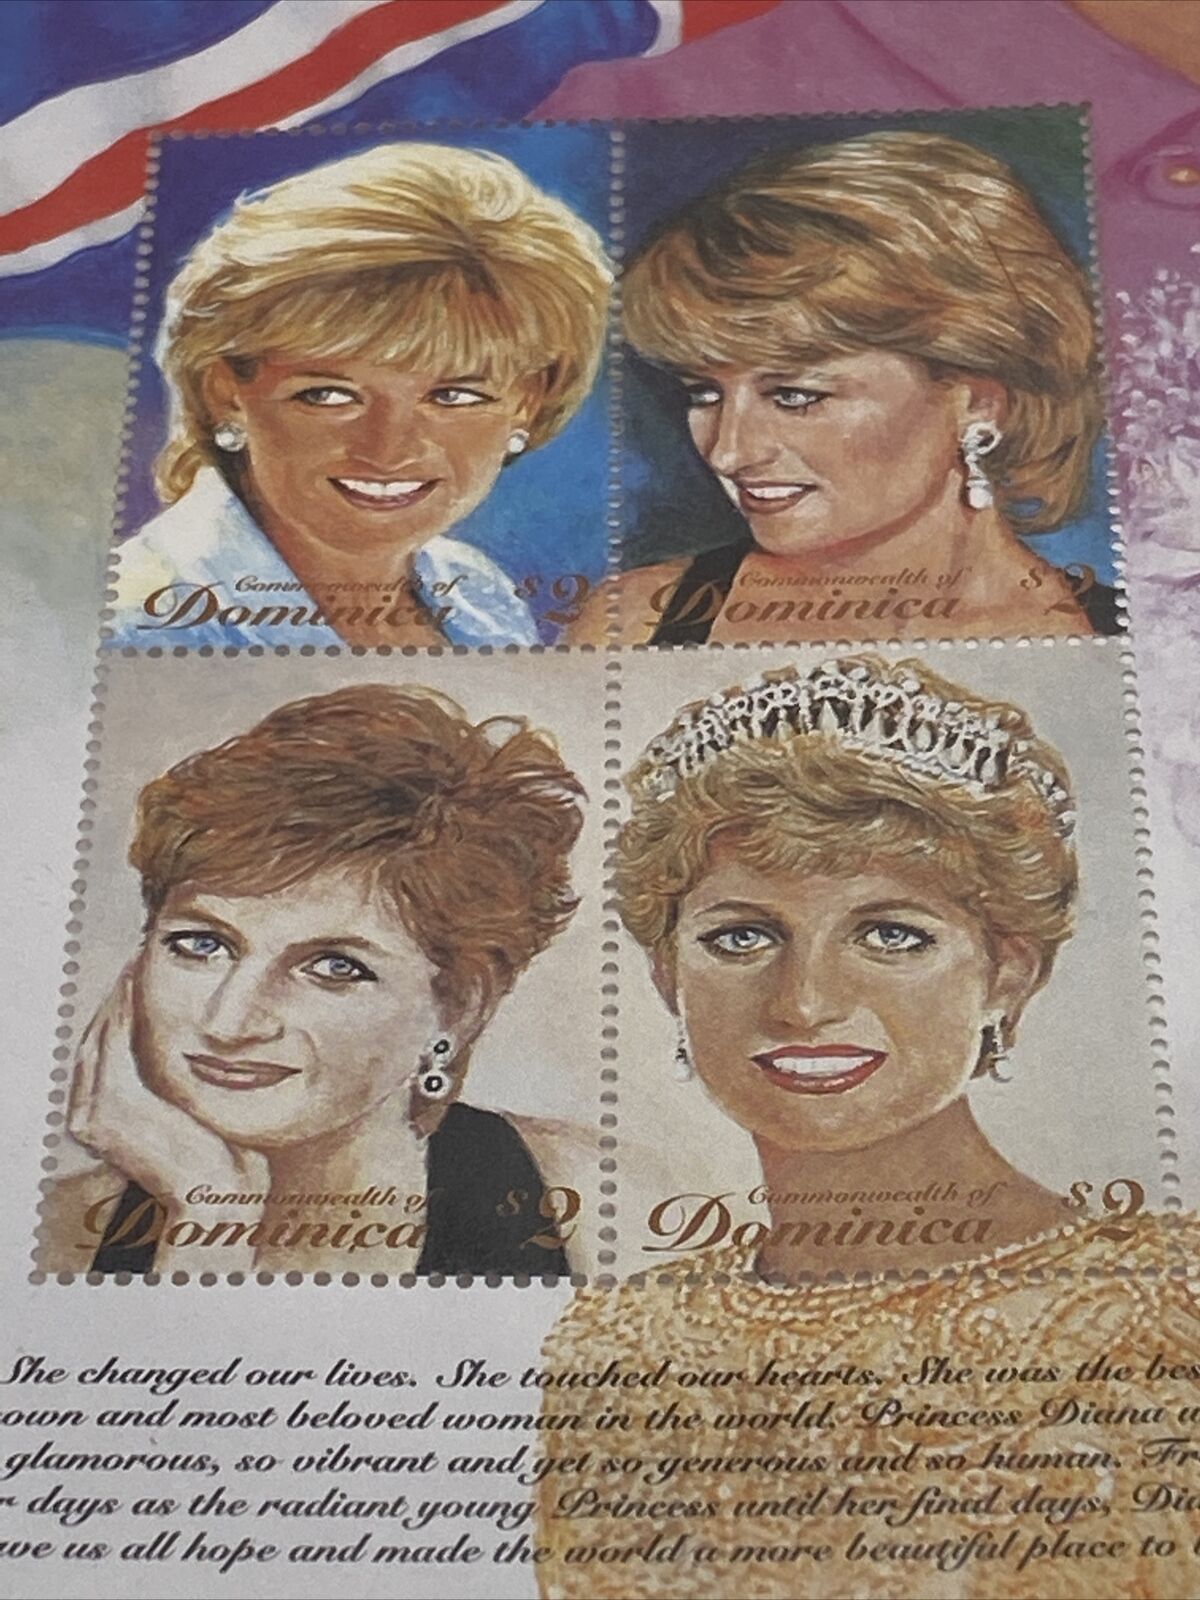 Princess Diana Royal Portraits Plate Block Of 4 Stamps Authenticity Certificate Без бренда - фотография #3